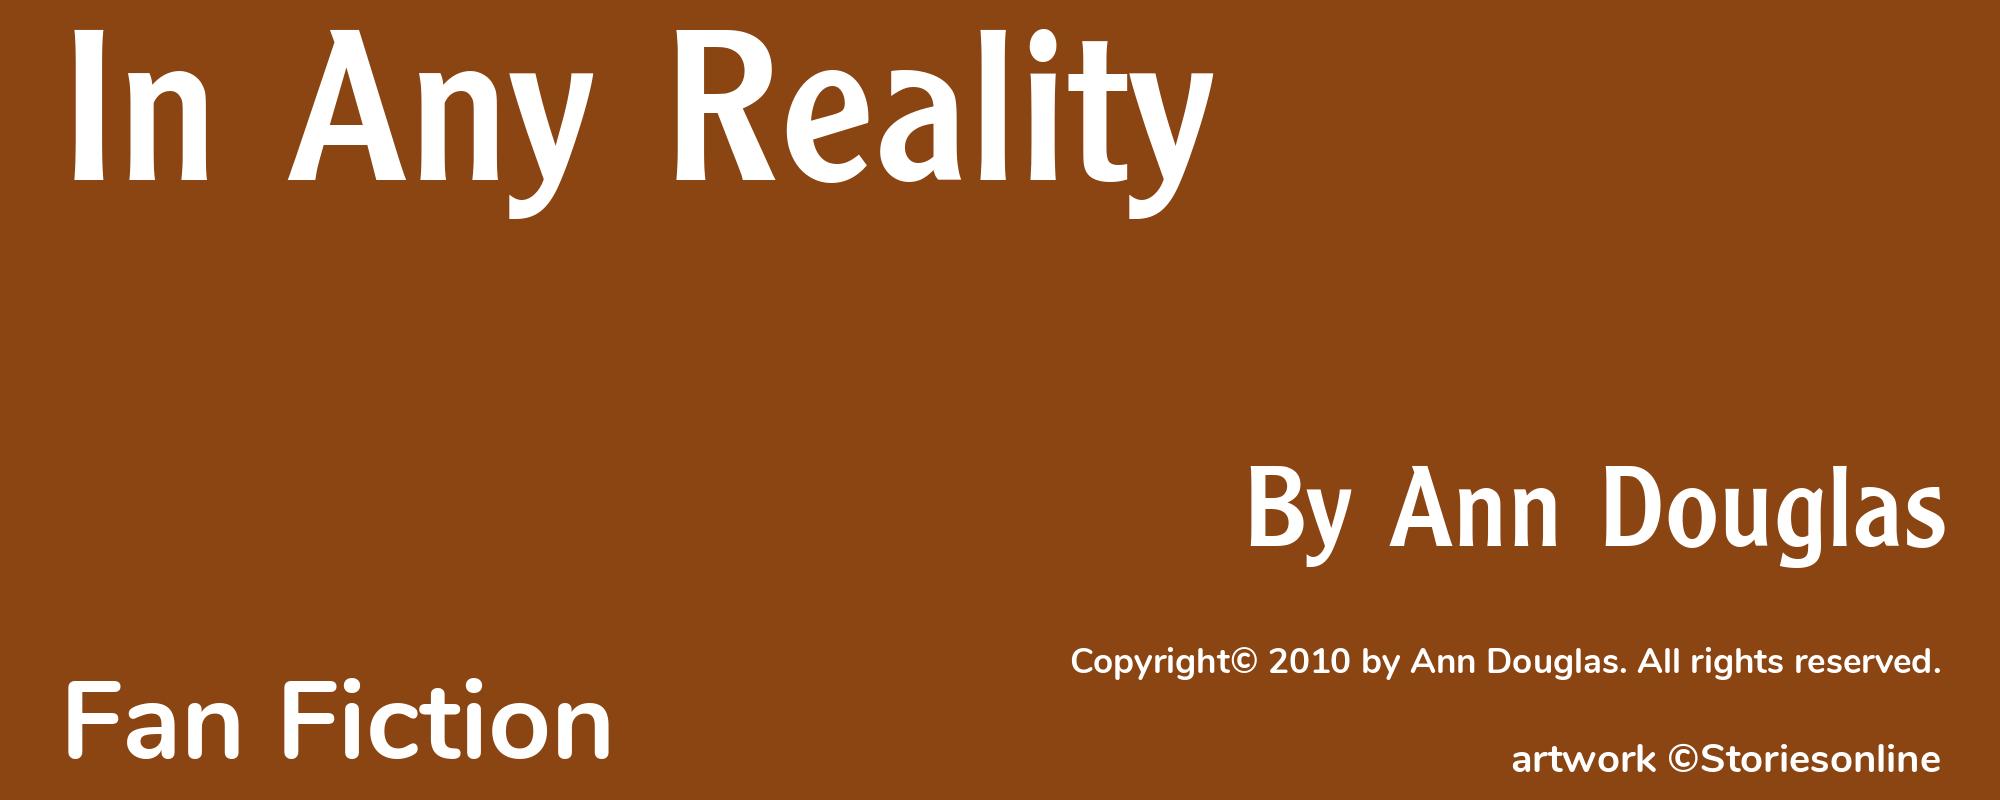 In Any Reality - Cover